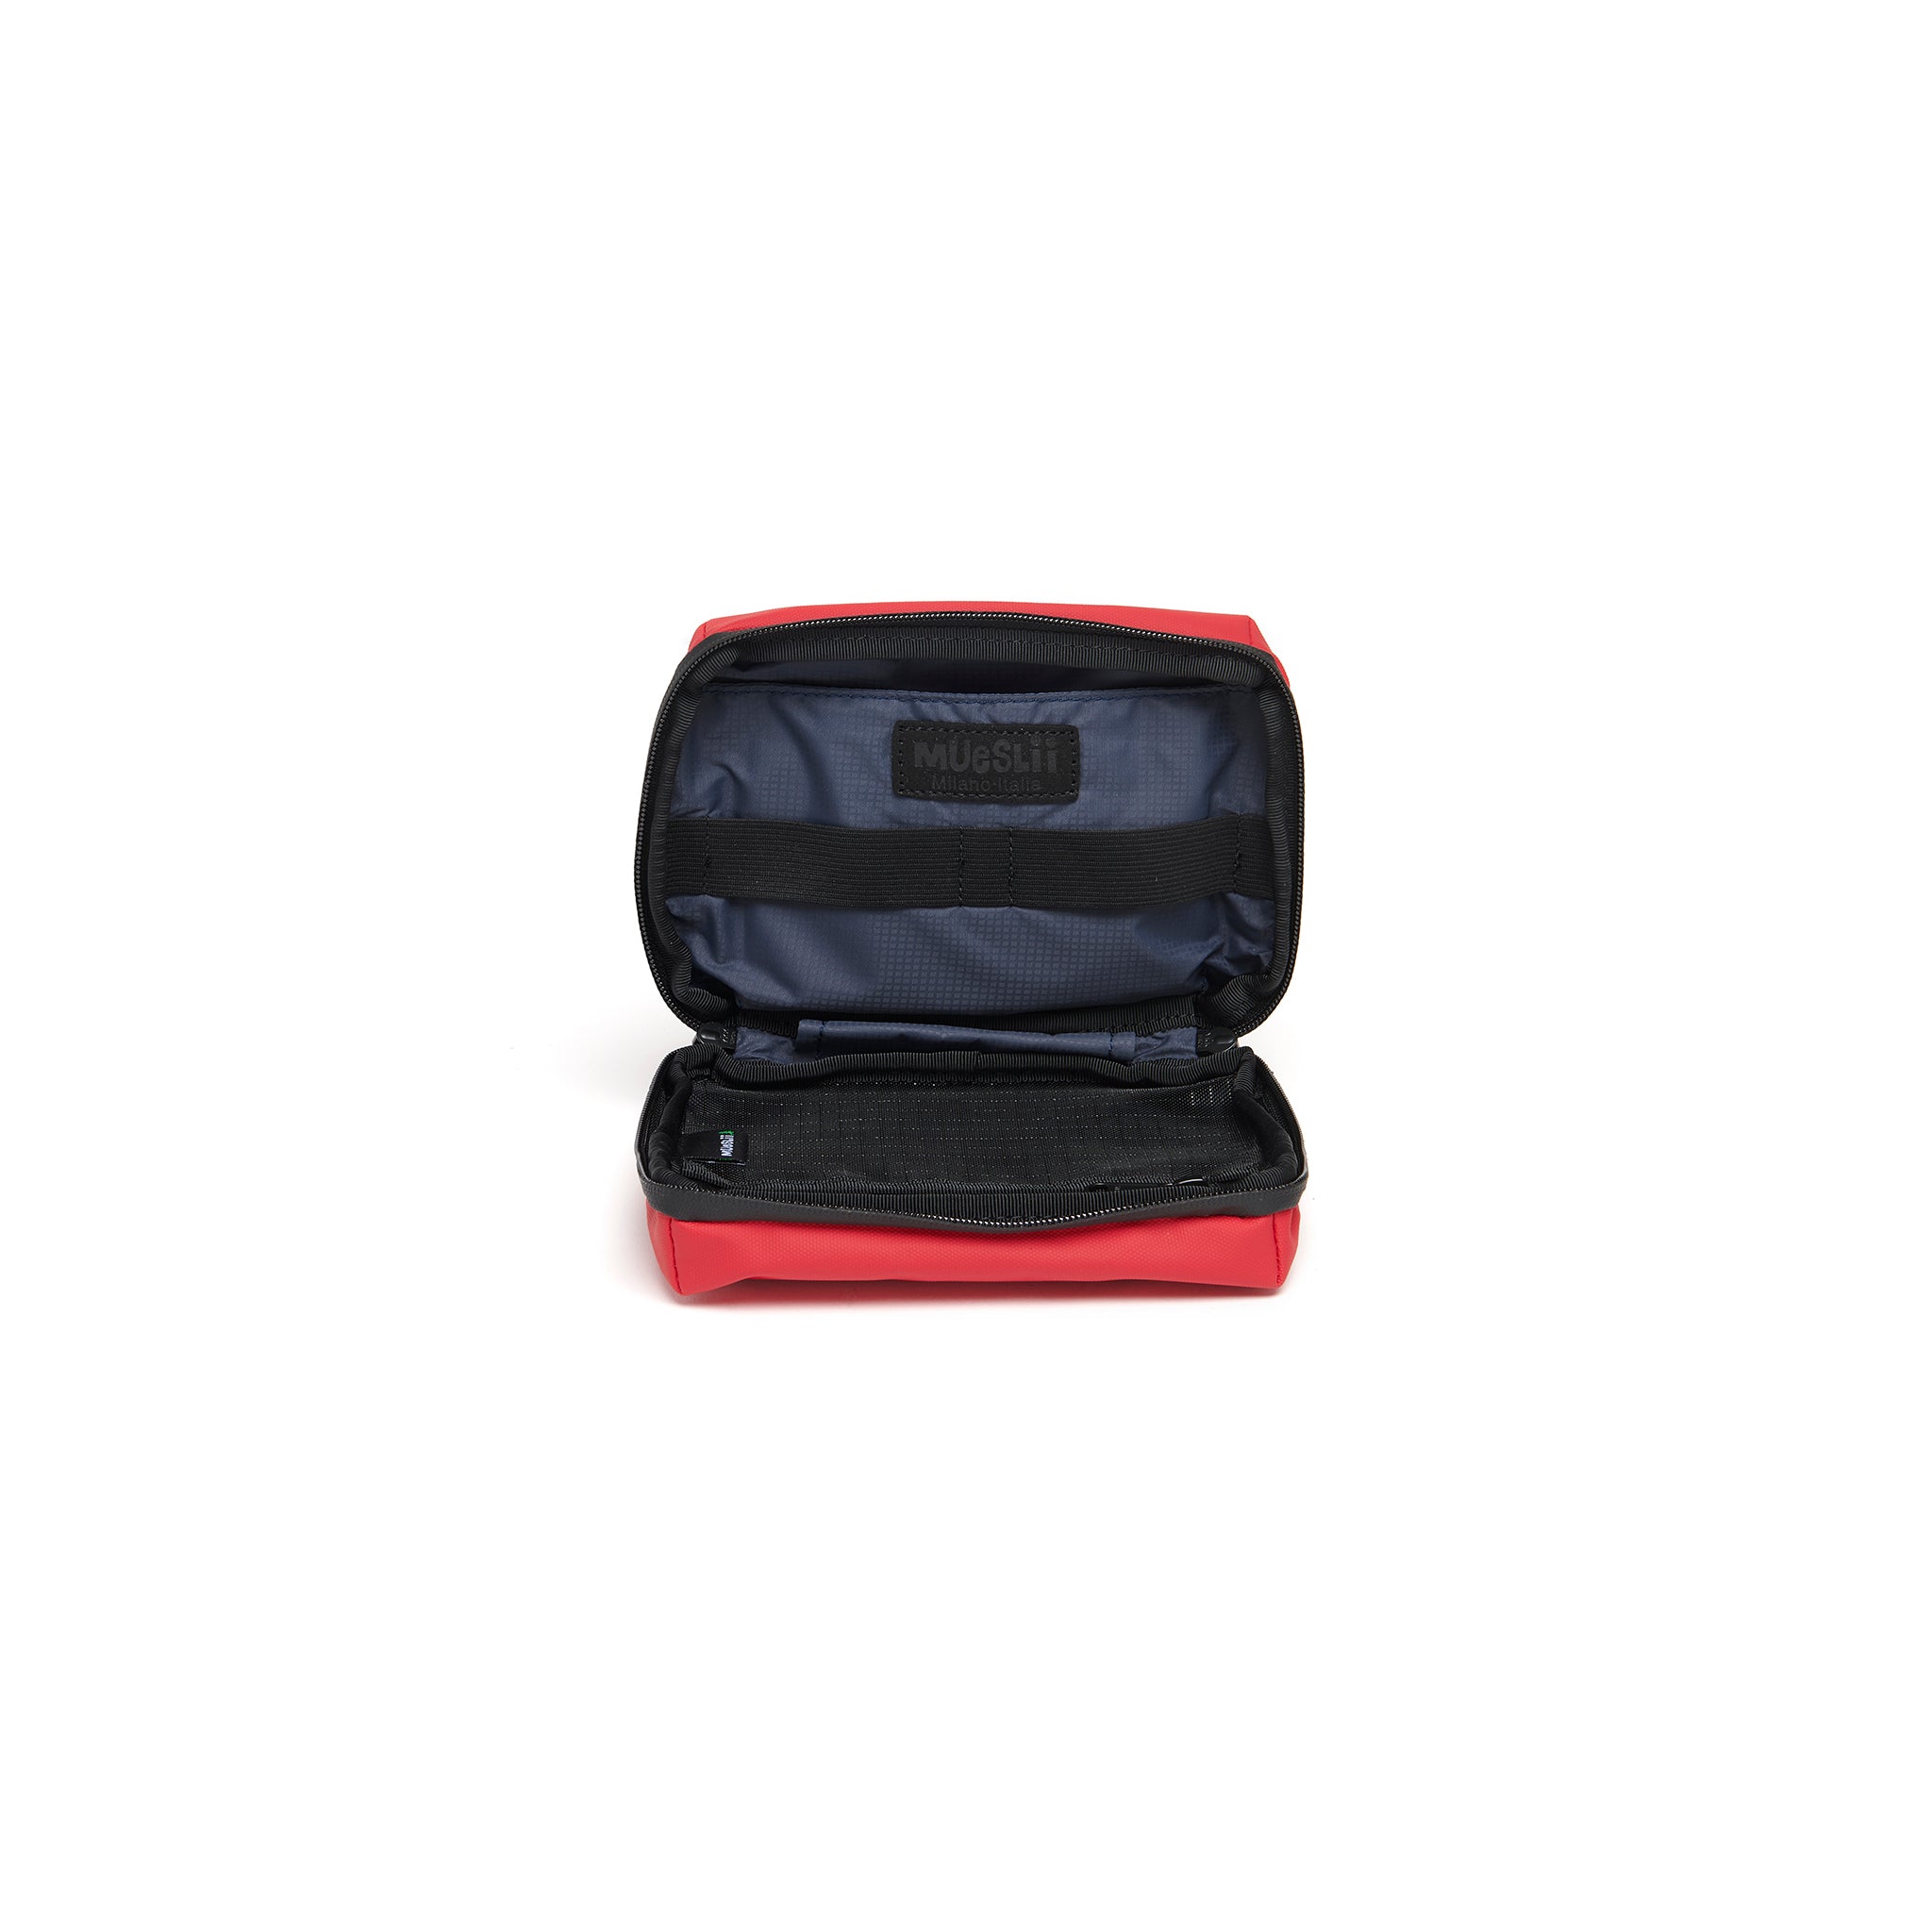 Mueslii tech case, made of PU coated waterproof nylon, color coral red, inside view.